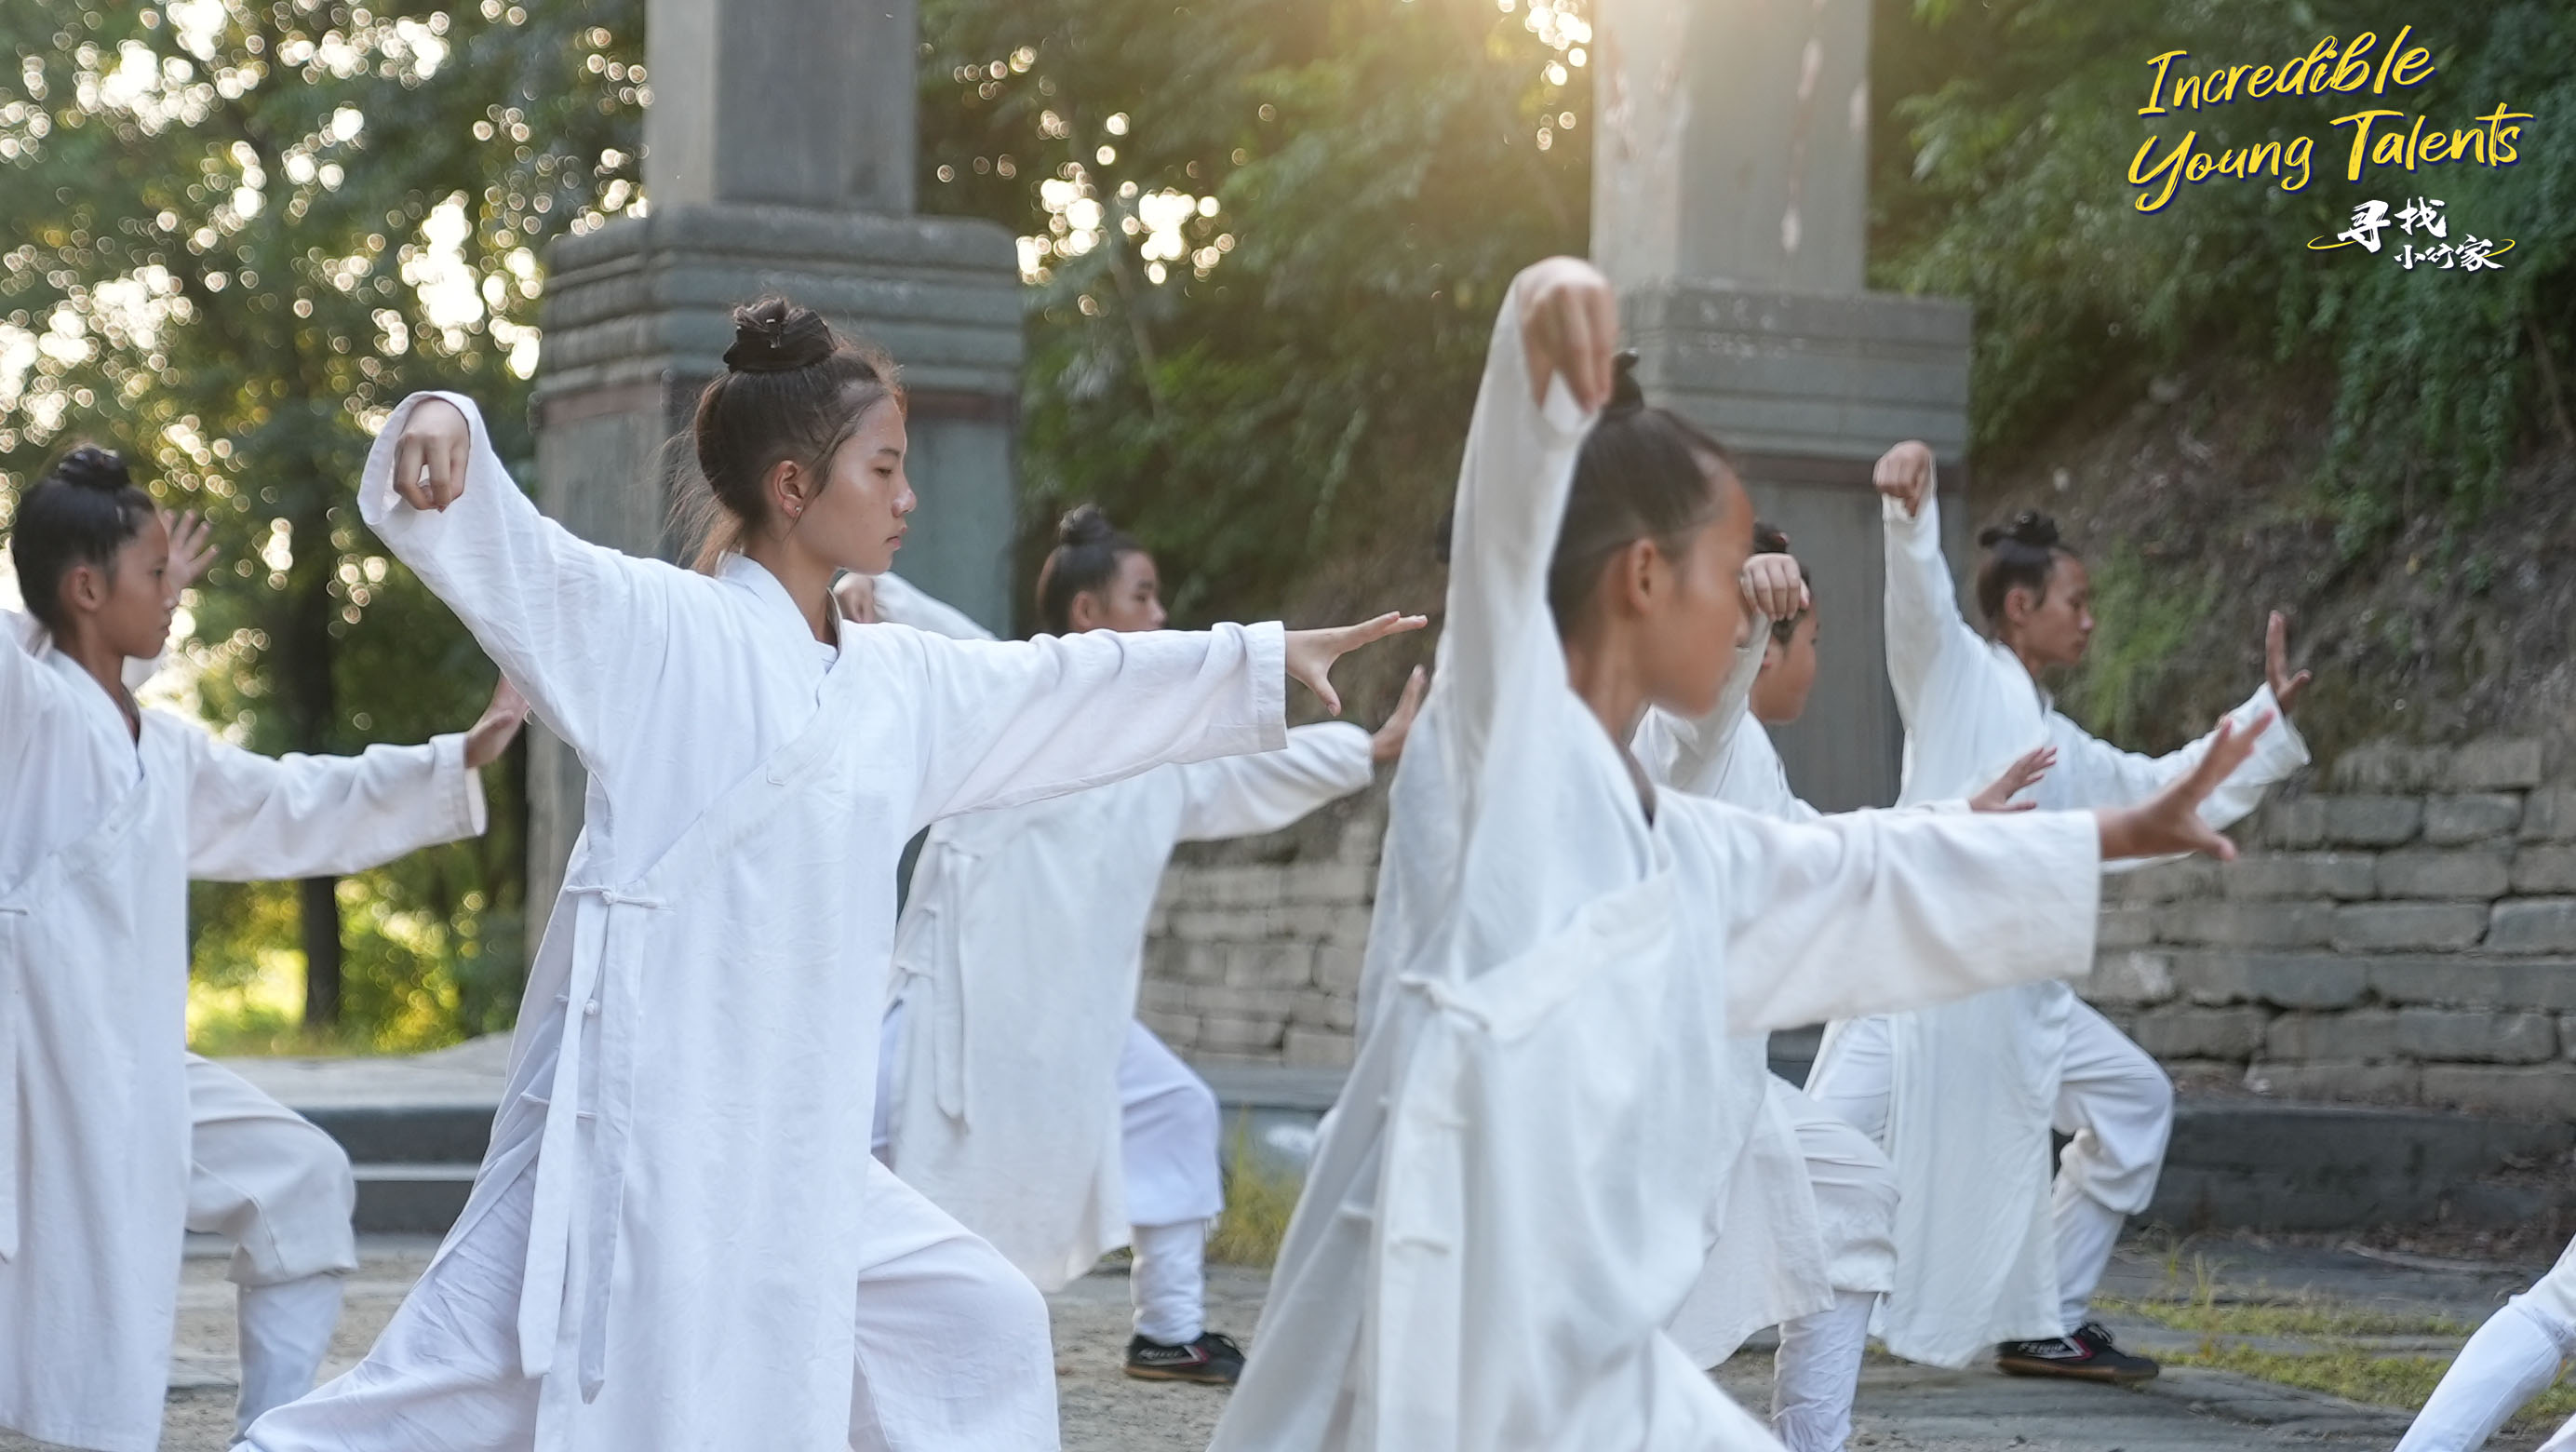 Young students of Tai Chi practice in the Wudang Mountains. /CGTN